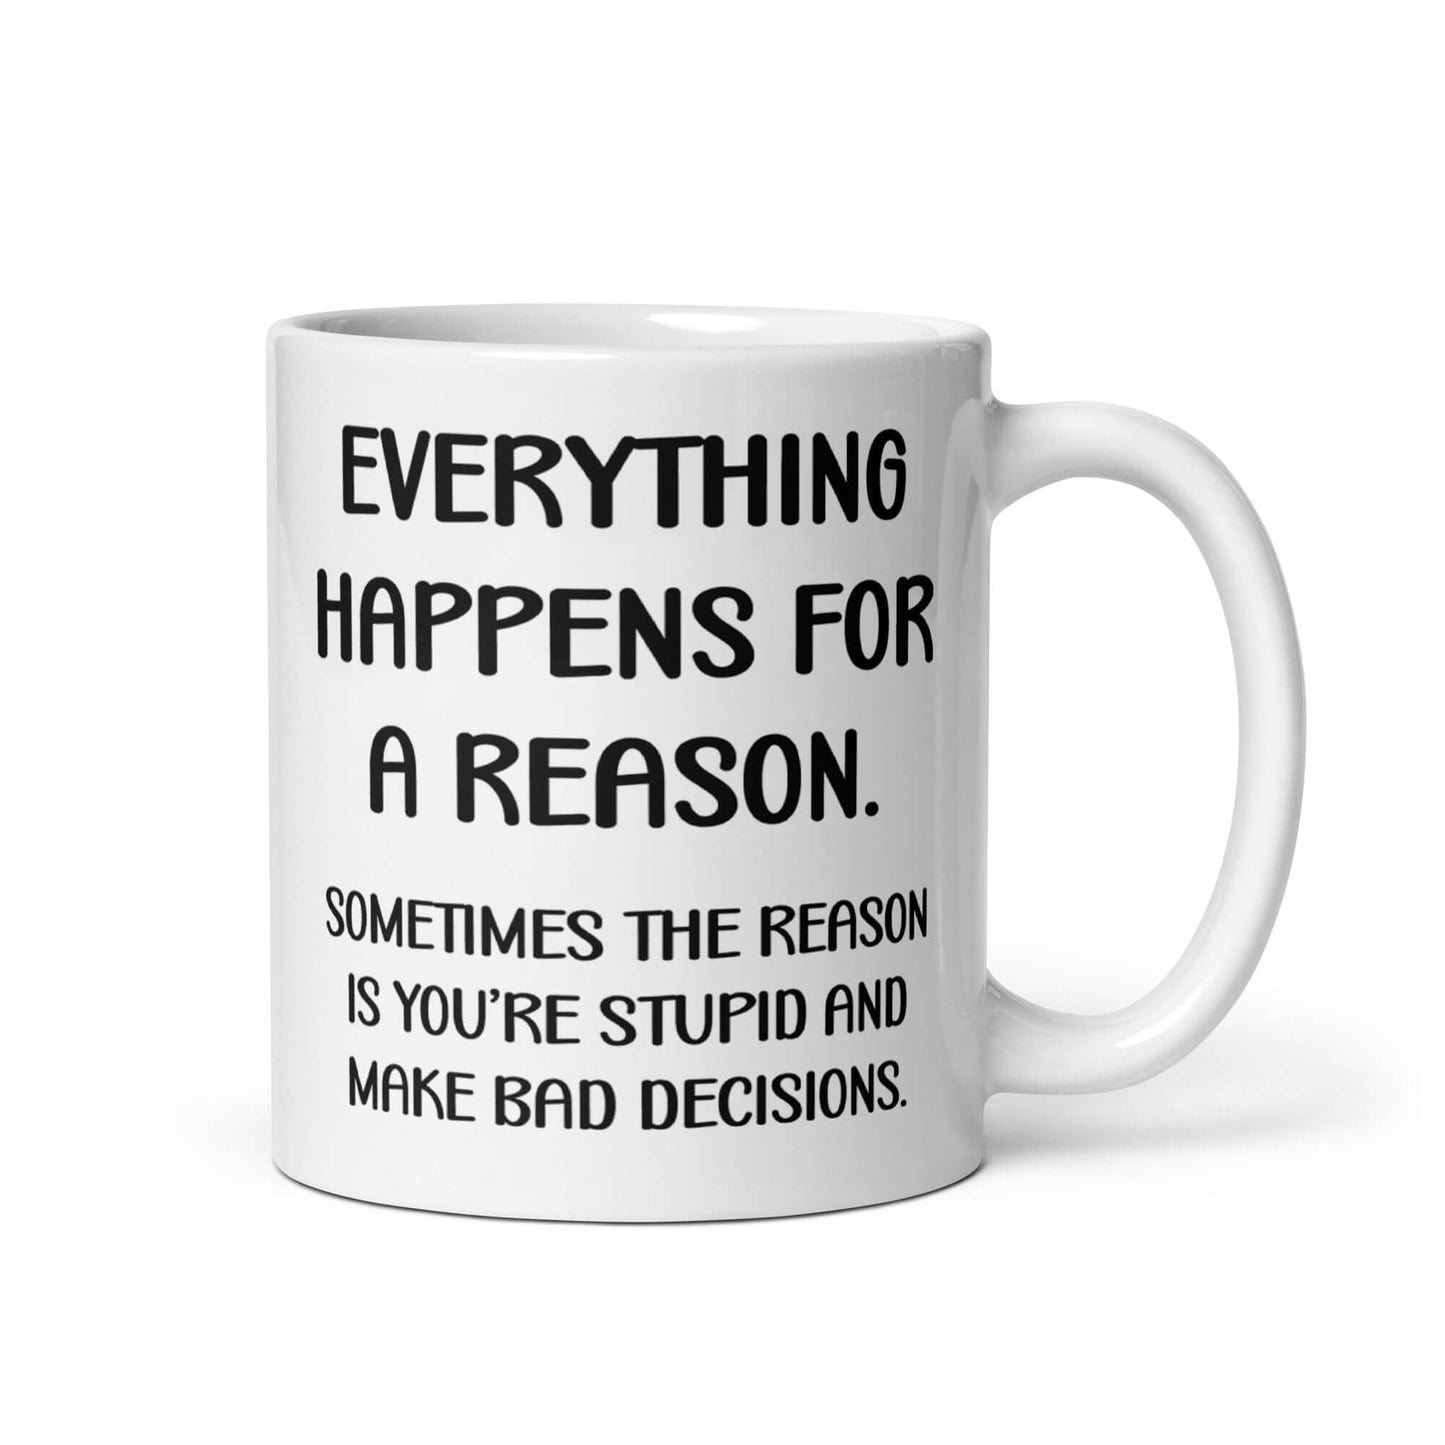 White ceramic mug with the words Everything happens for a reason. Sometimes the reason is you're stupid and make bad decisions printed on both sides.